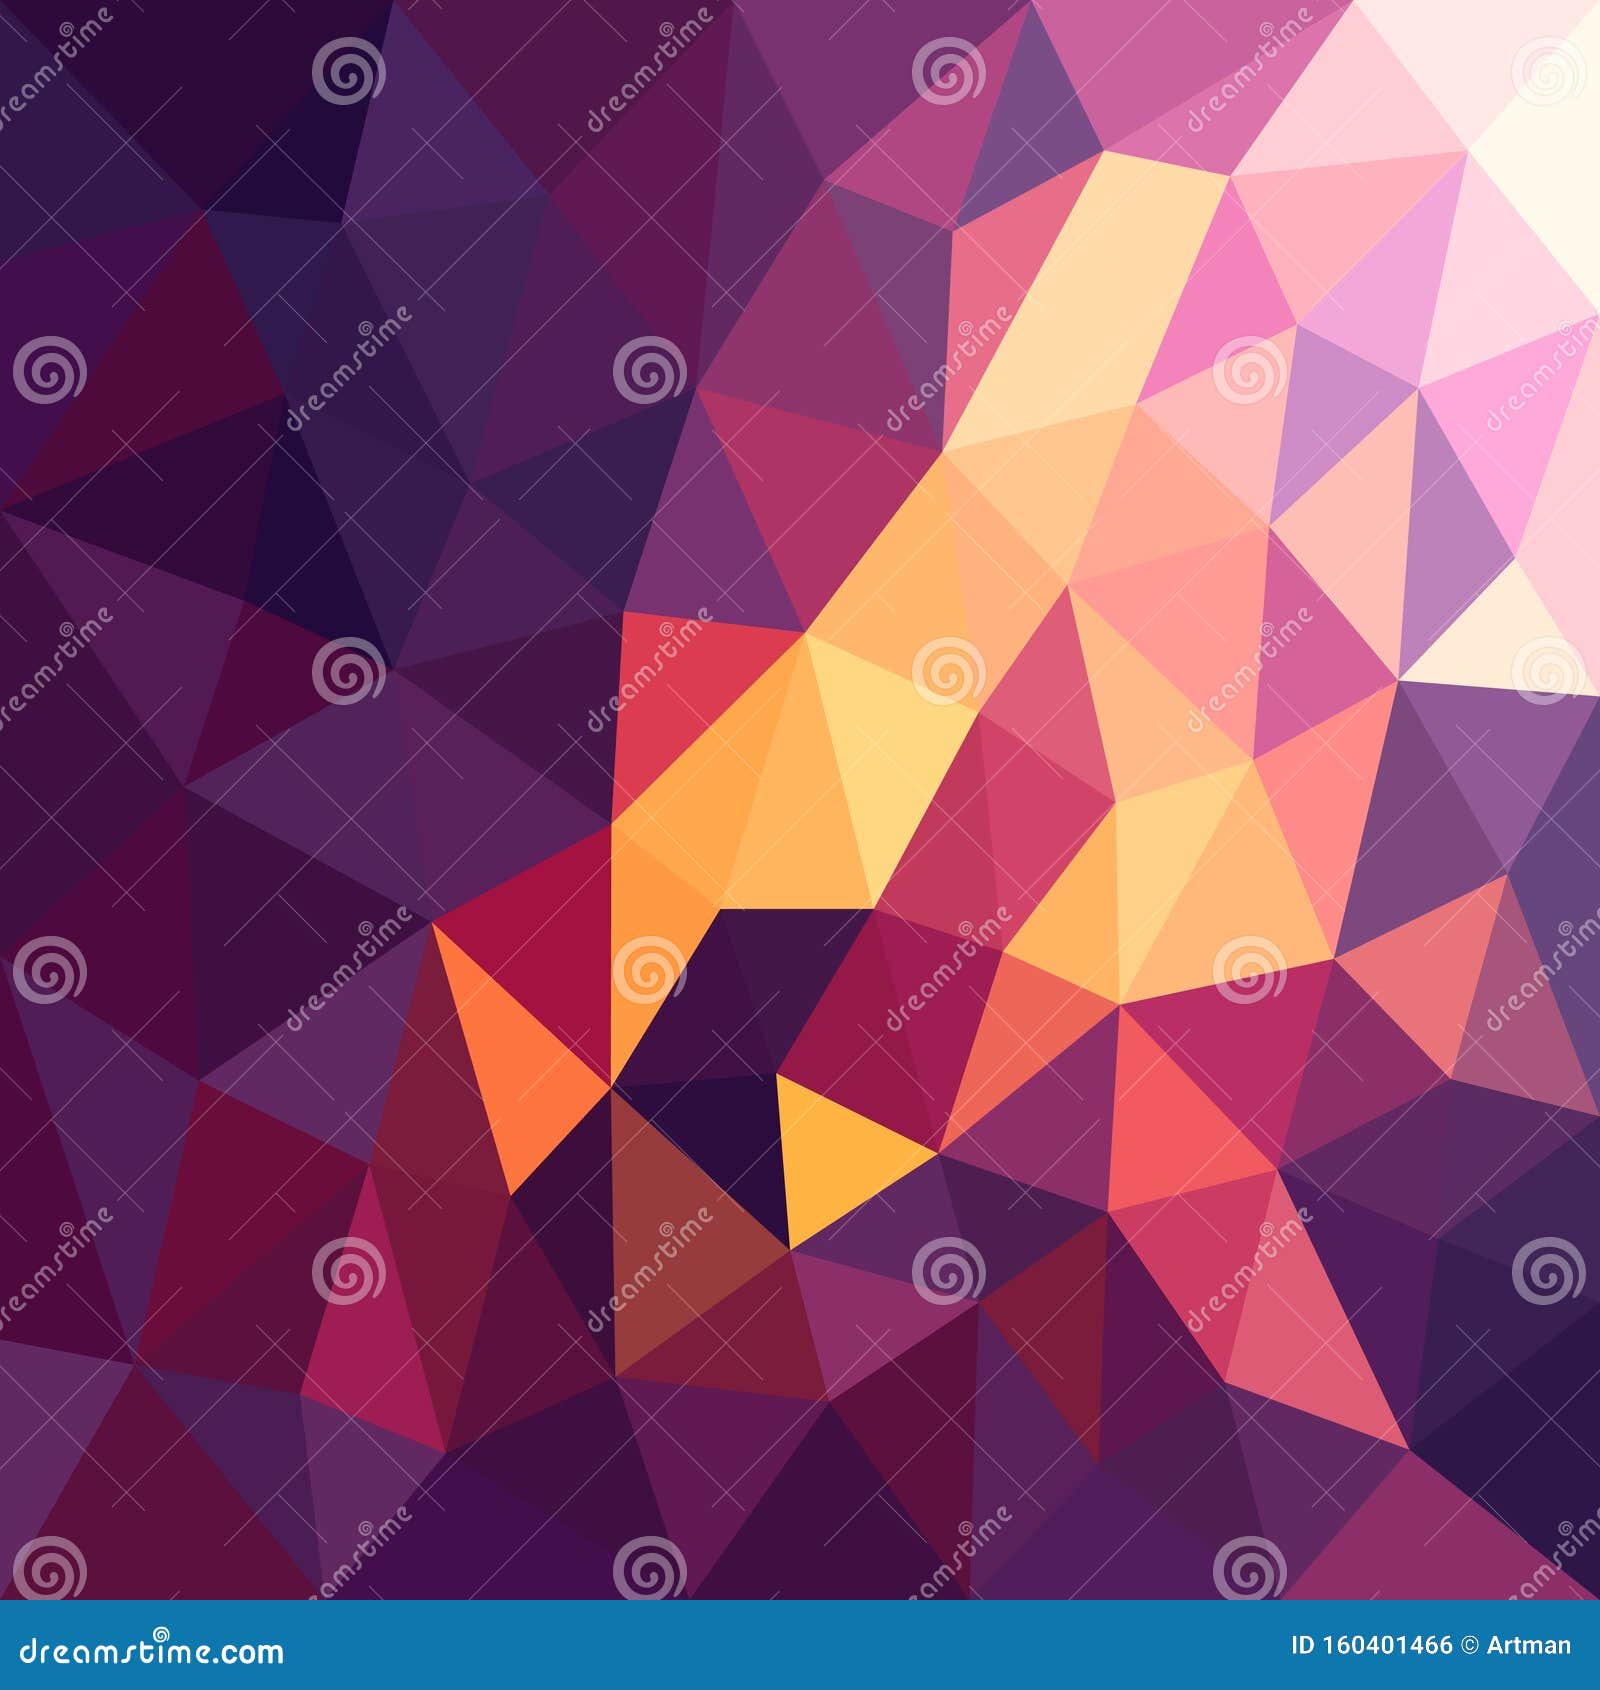 low poly abstract purple yellow background